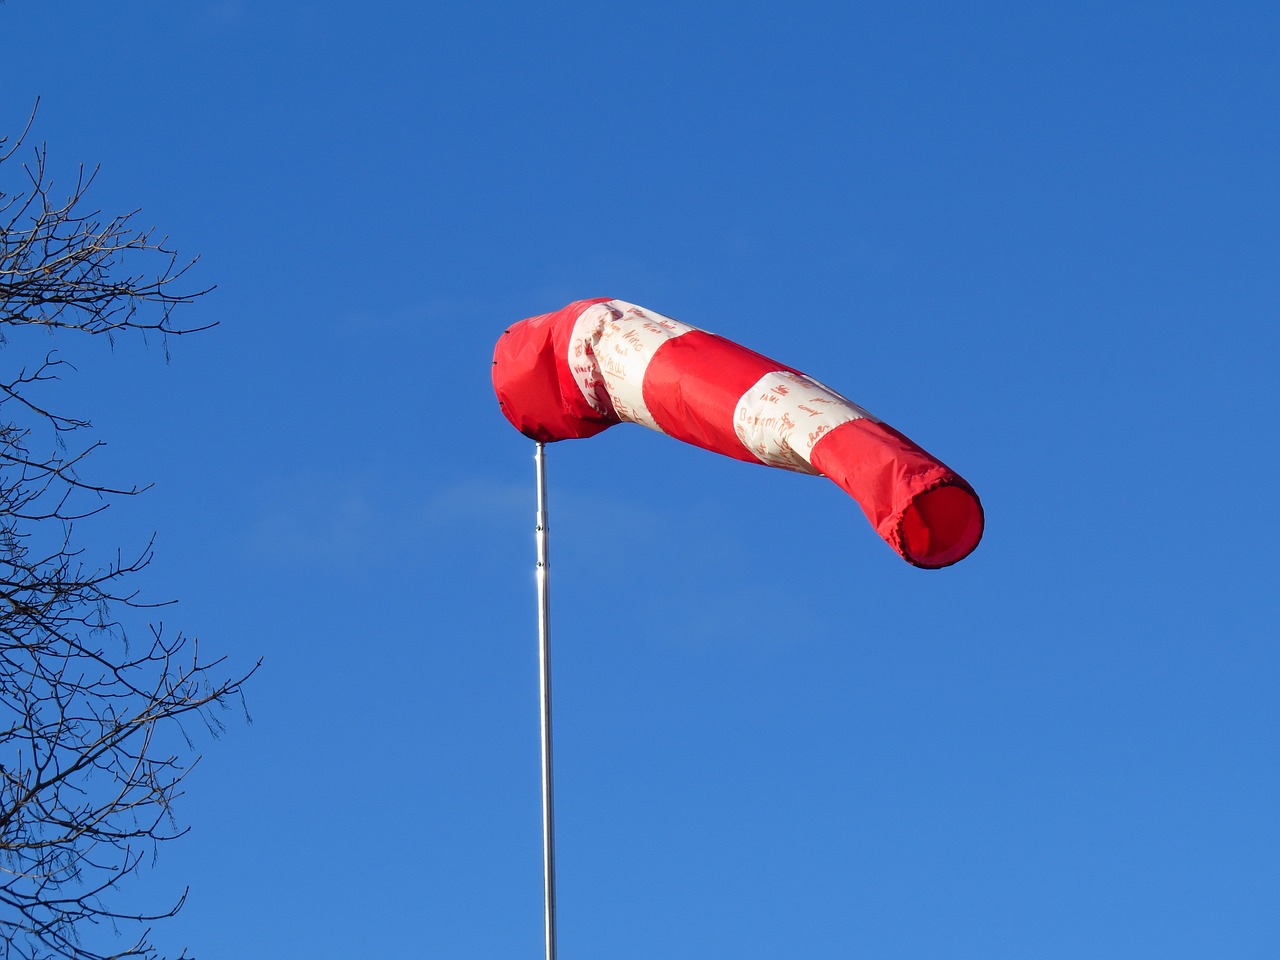 wind direction indicator, air bag, cross wind